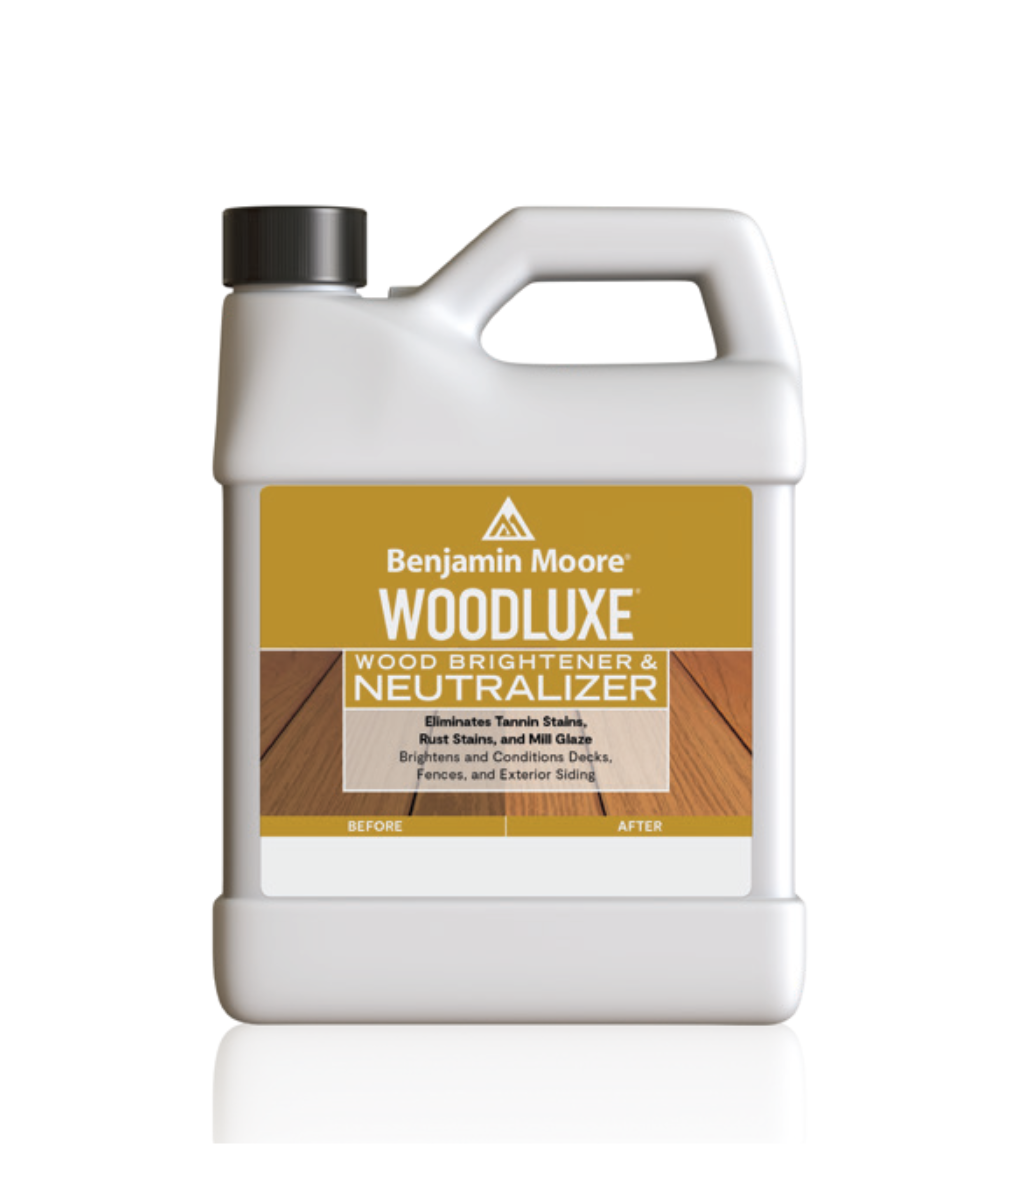 Benjamin Moore Woodluxe Wood Brightener & Neutralizer Gallon available to shop at Regal Paint Centers in Maryland, Virginia and DC.